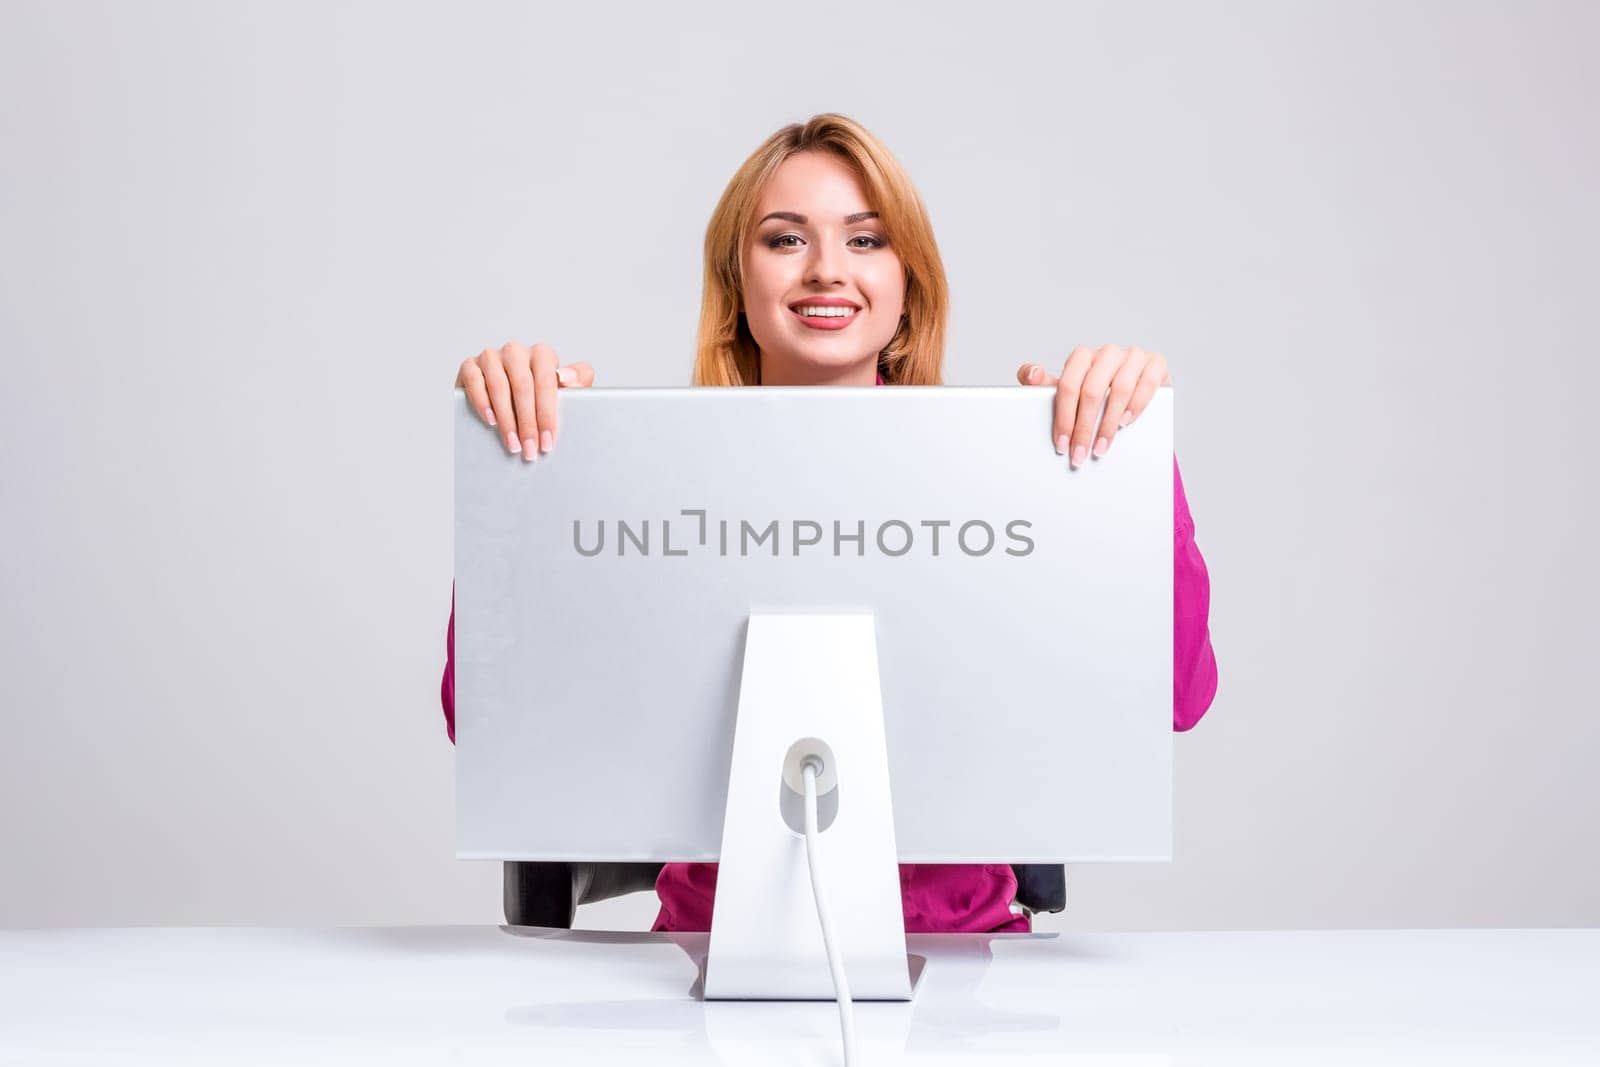 young woman sitting in the table and using computer on gray background. Surprised and scared hidden behind the monitor. It peeping from behind him